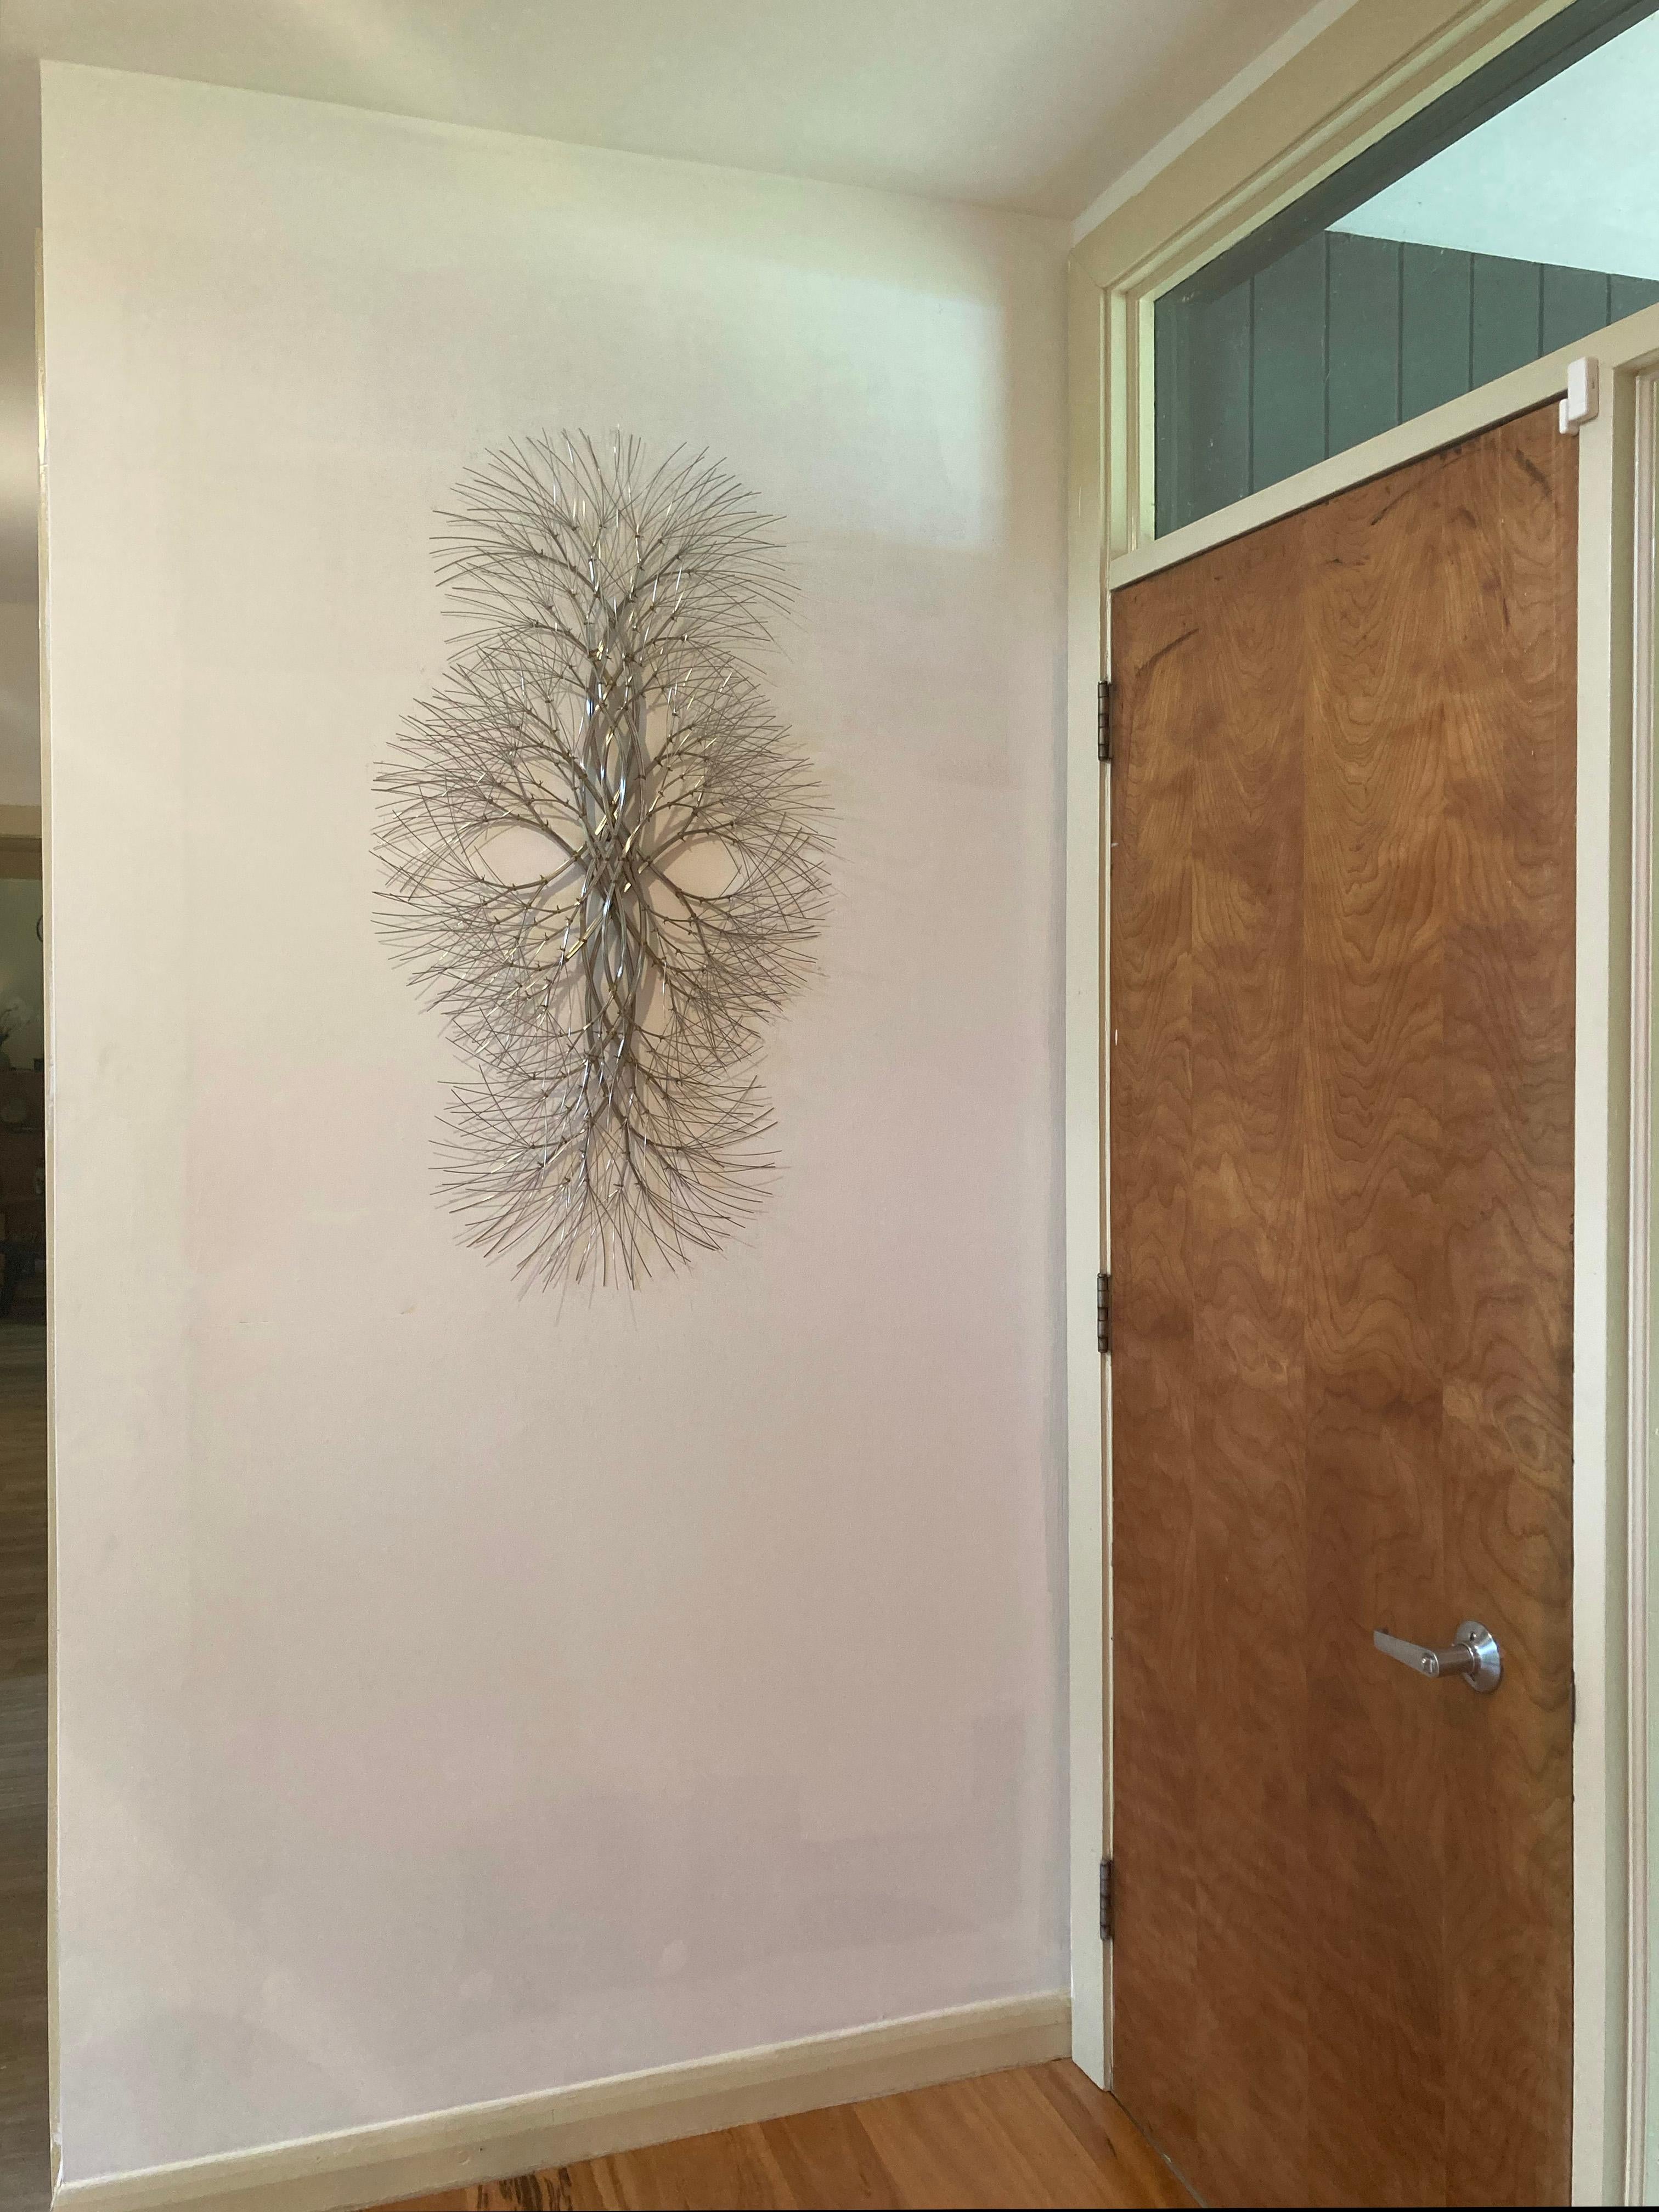 This wall sculpture is a study in natural forms, reflection, and movement. By artist Kue King. 

Search 